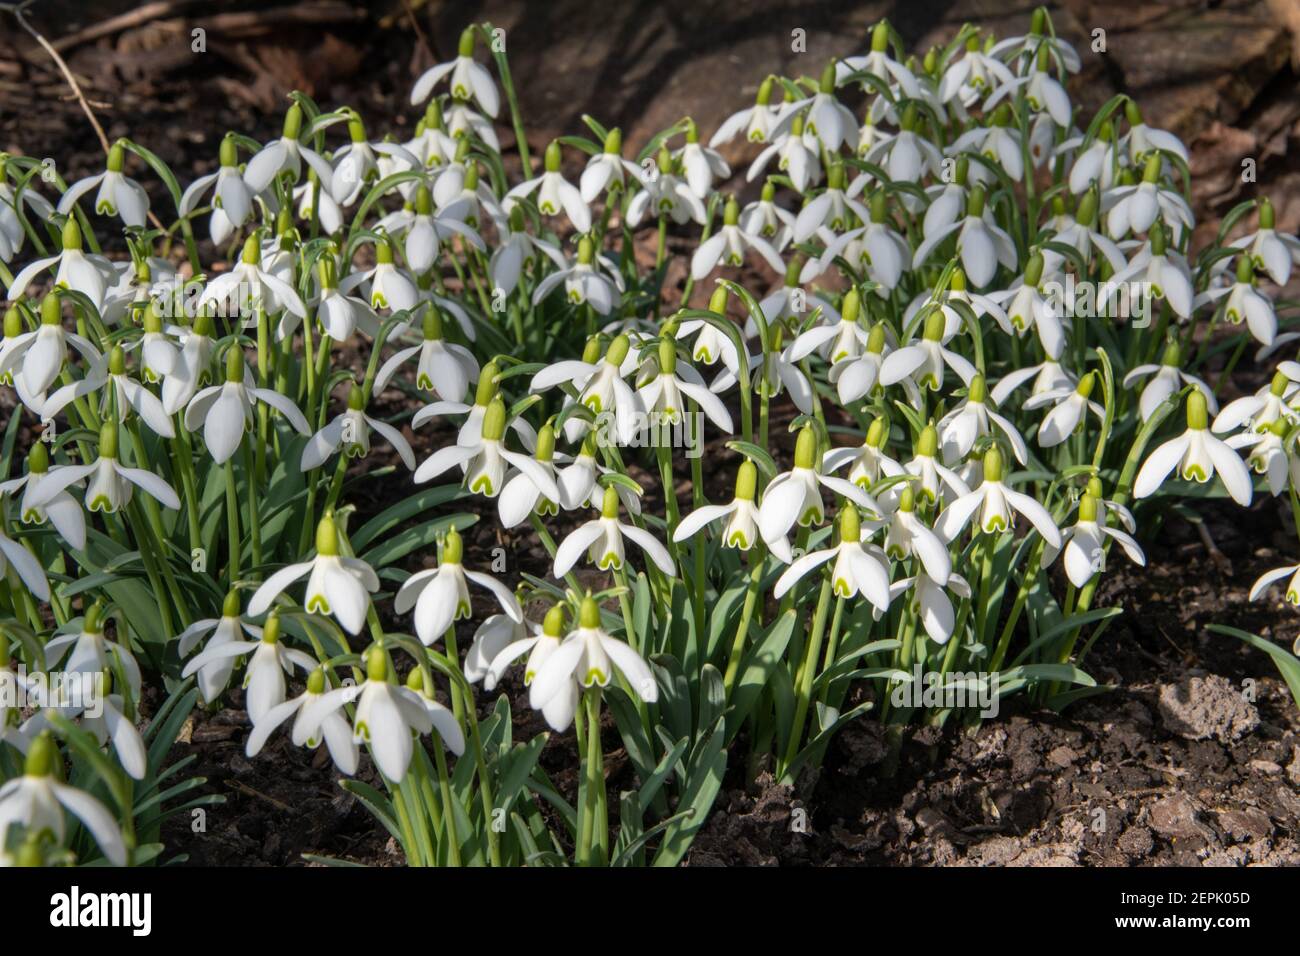 A group of snowdrops, Galanthus nivalis, bloom among shrubs in February. Stock Photo